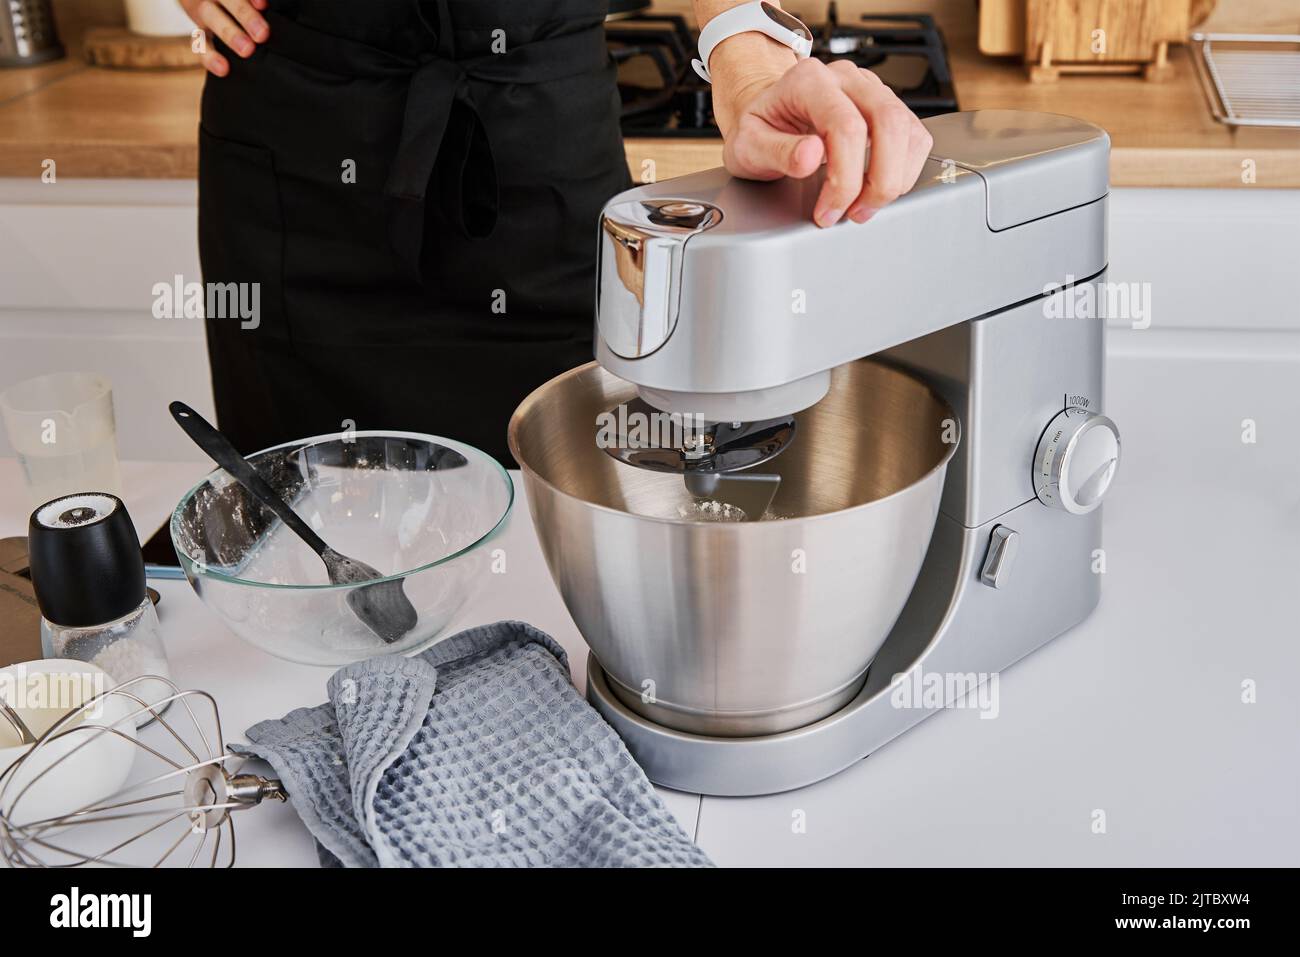 Woman cooking at preparing food, using food processor, Modern appliance for cooking Stock Photo